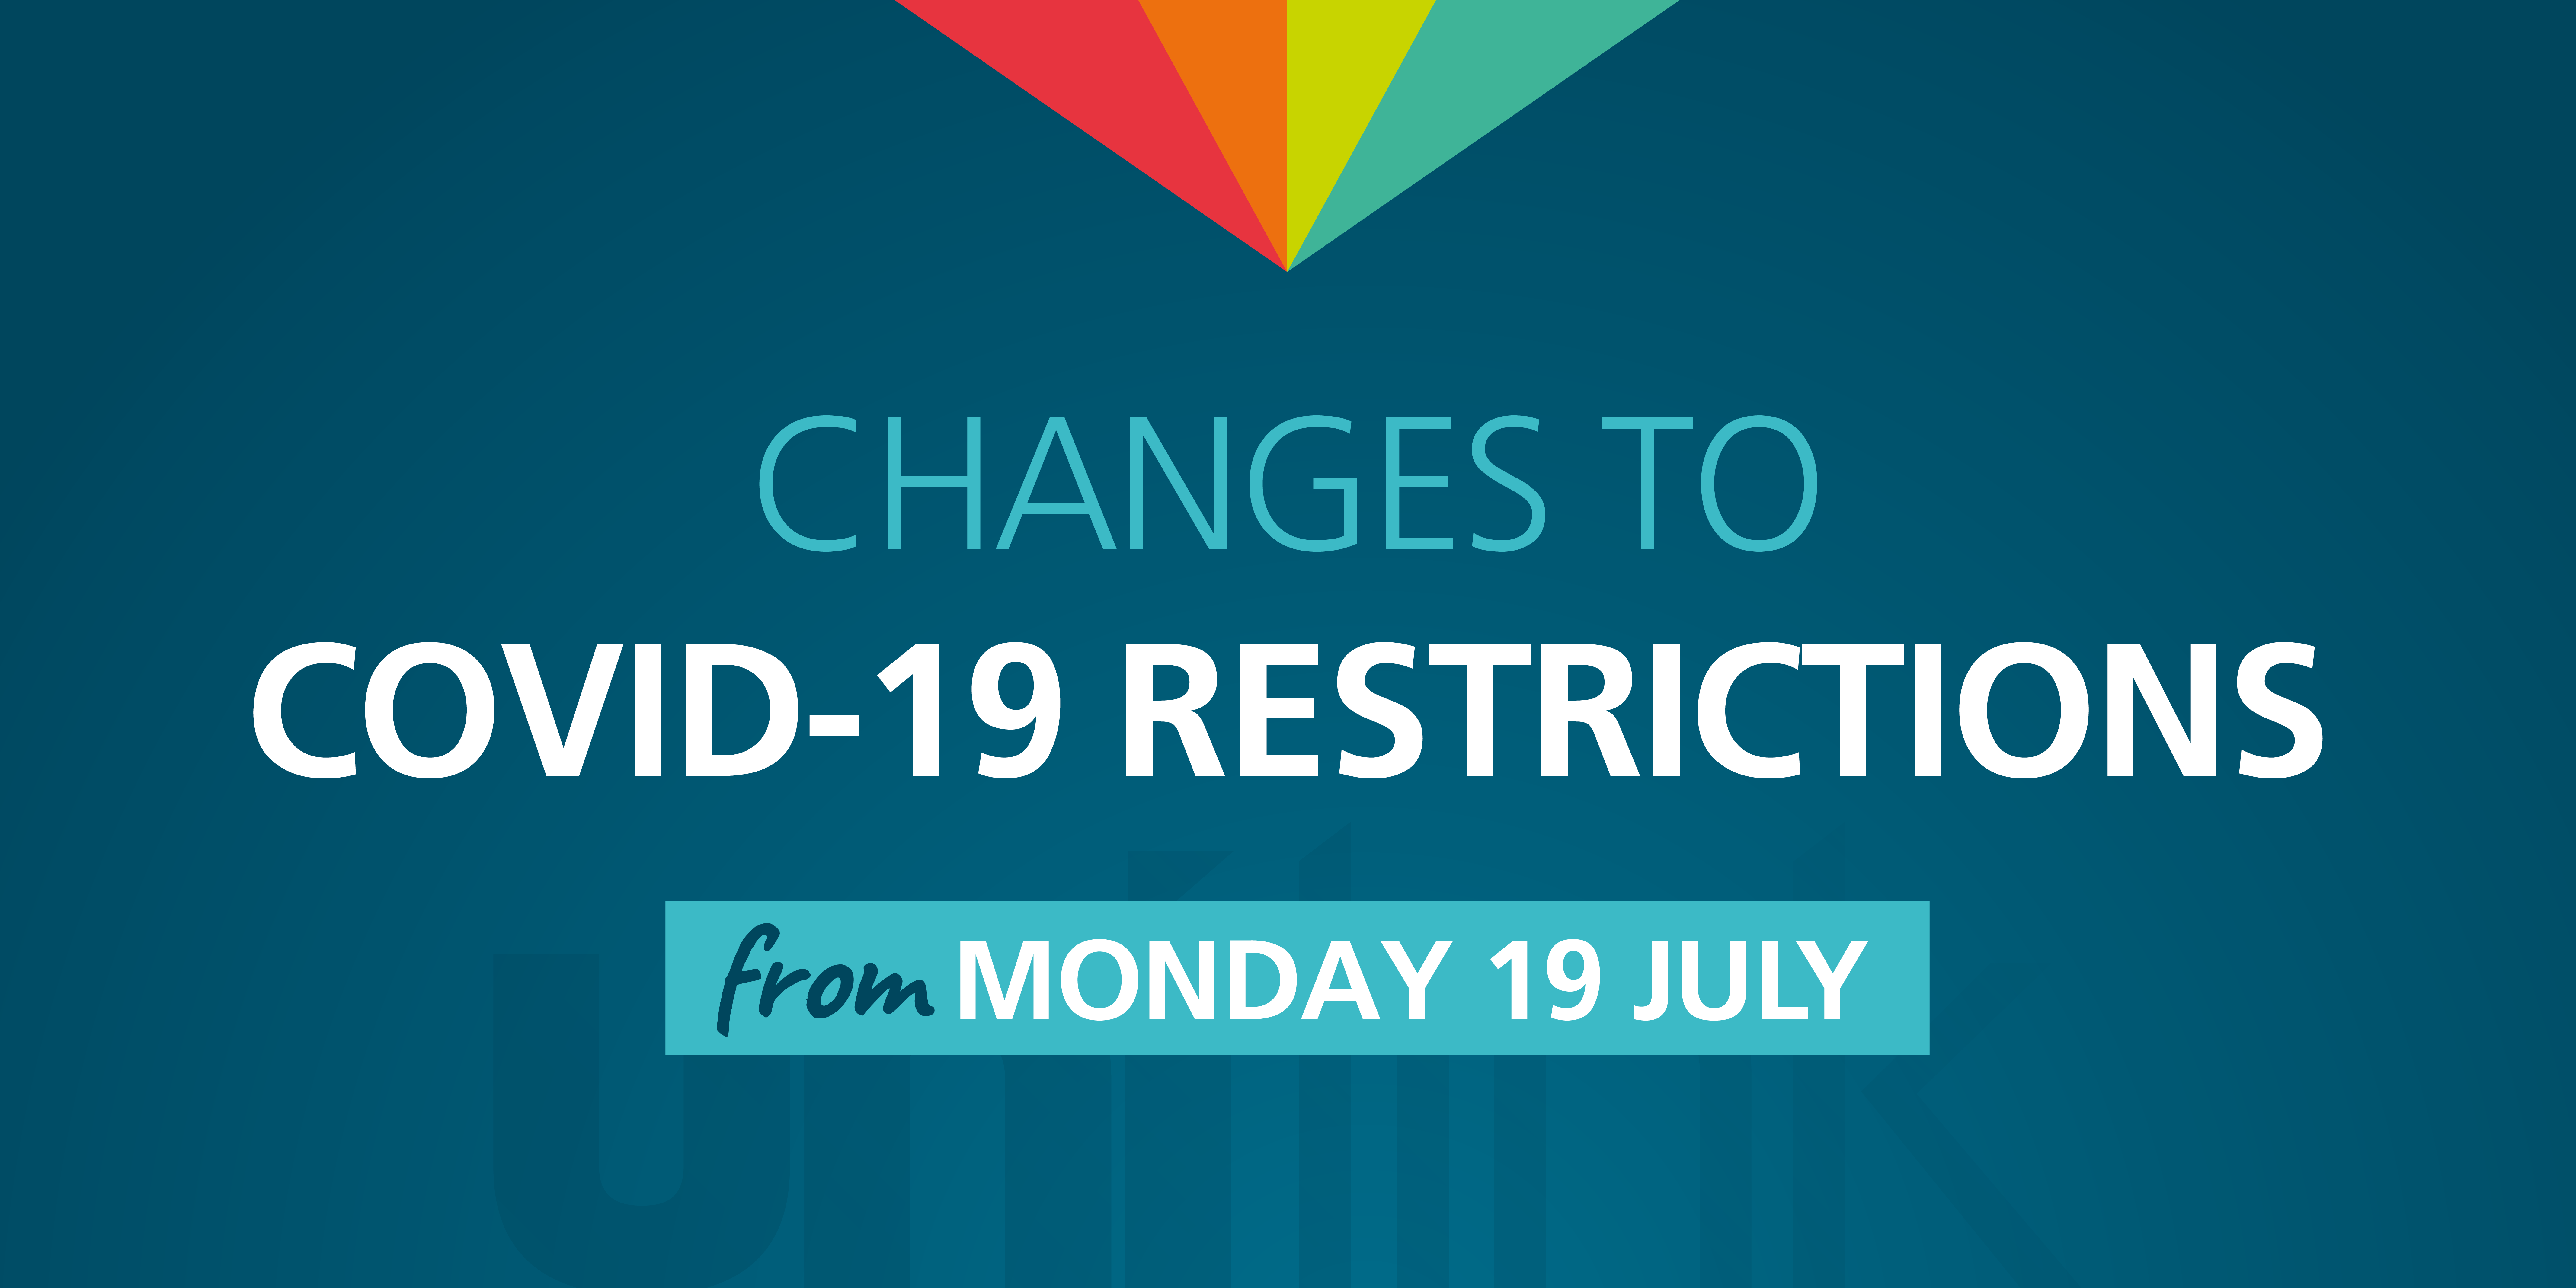 Changes to covid-19 restrictions in text